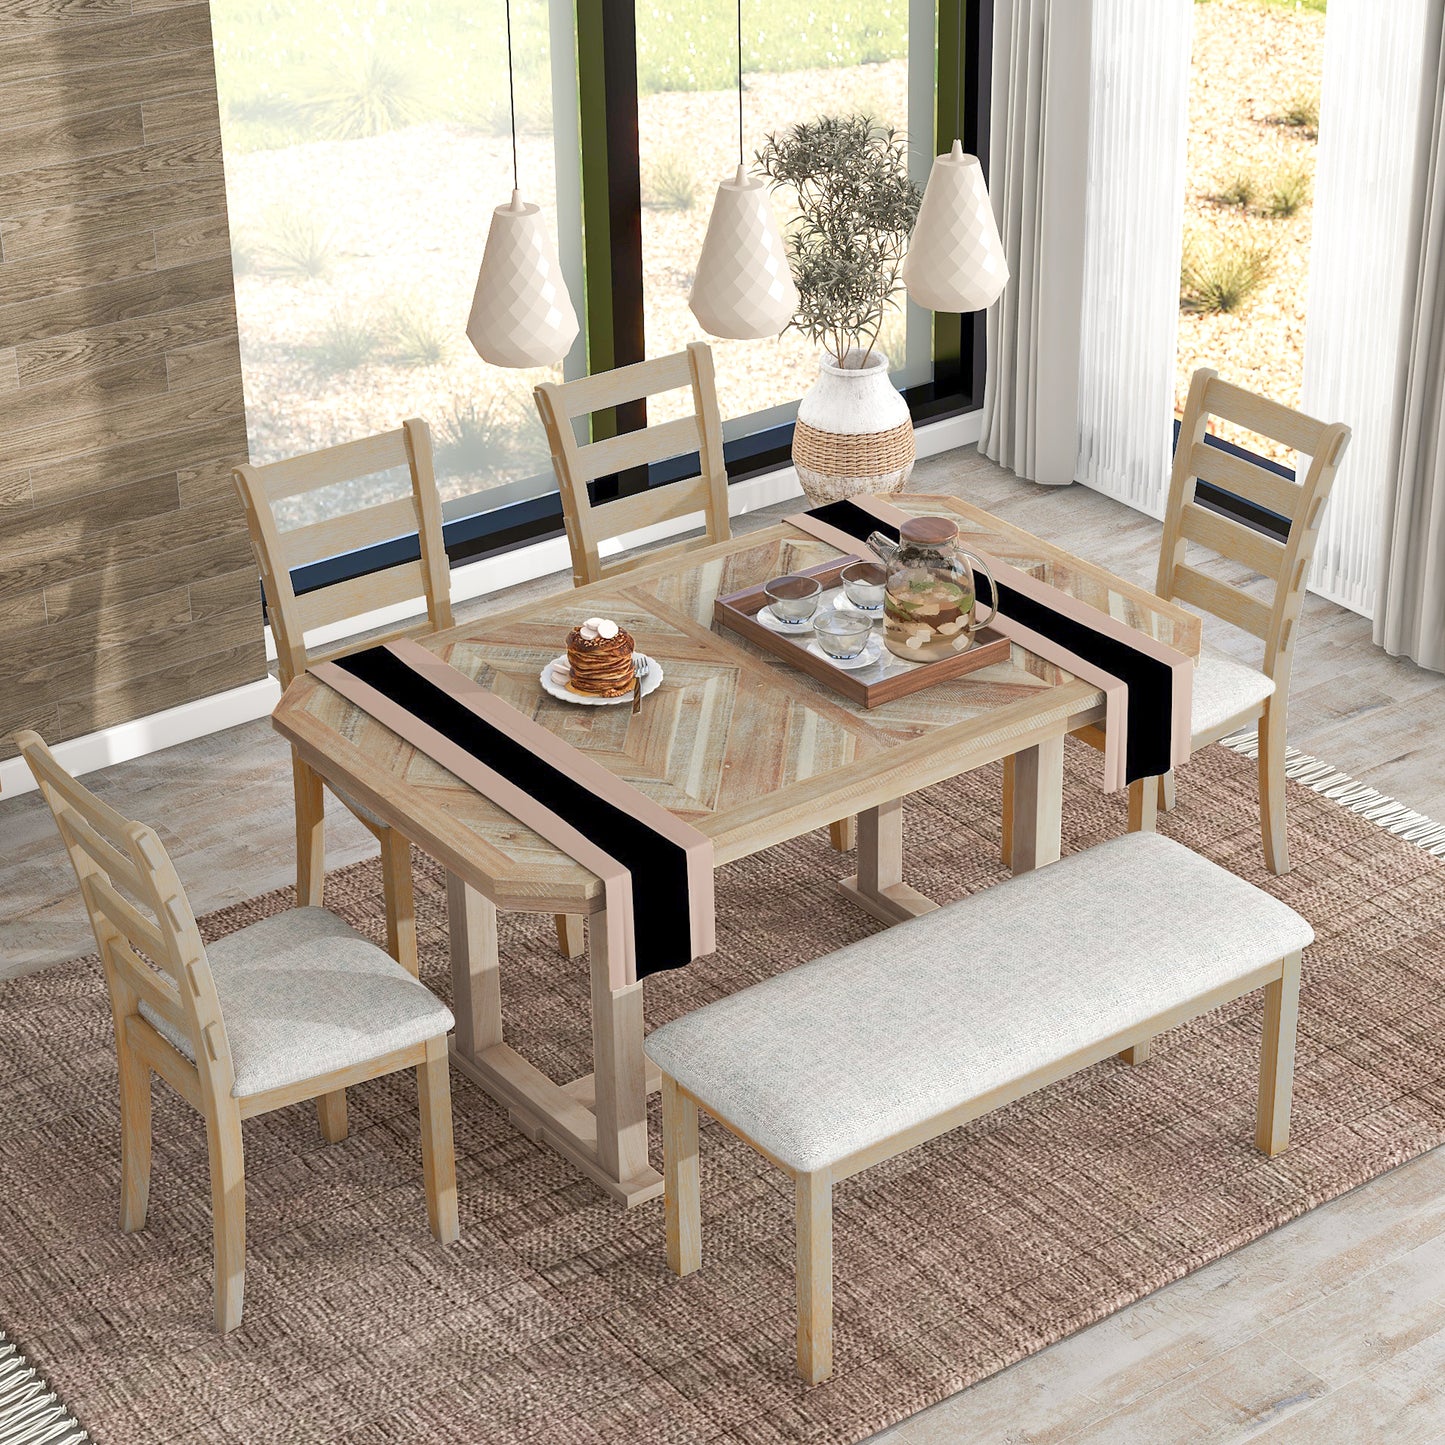 6-Piece Chevron Wood Dining Table Set with Bench